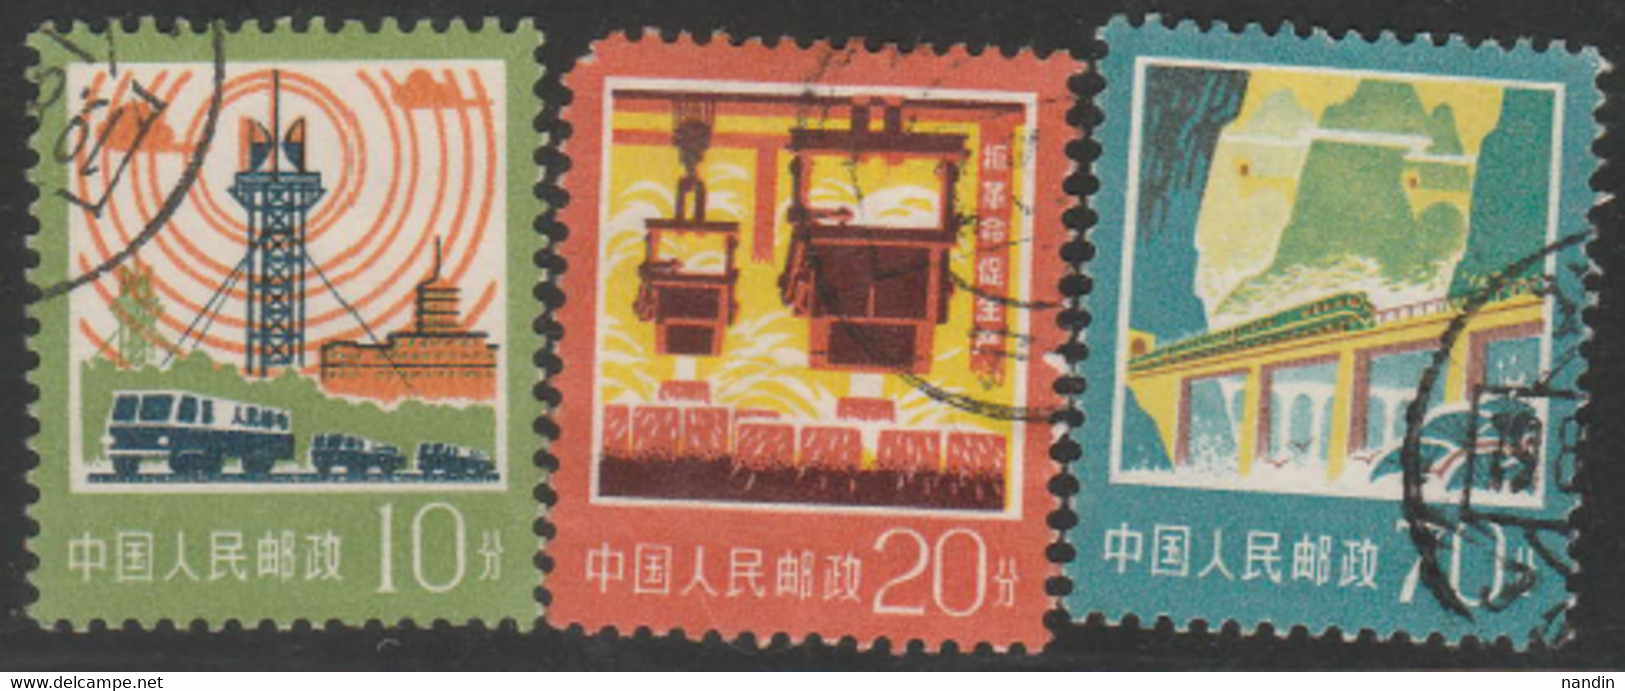 USED STAMPS From CHINA/ STAMP ON Idustry &	Agriculture - Used Stamps